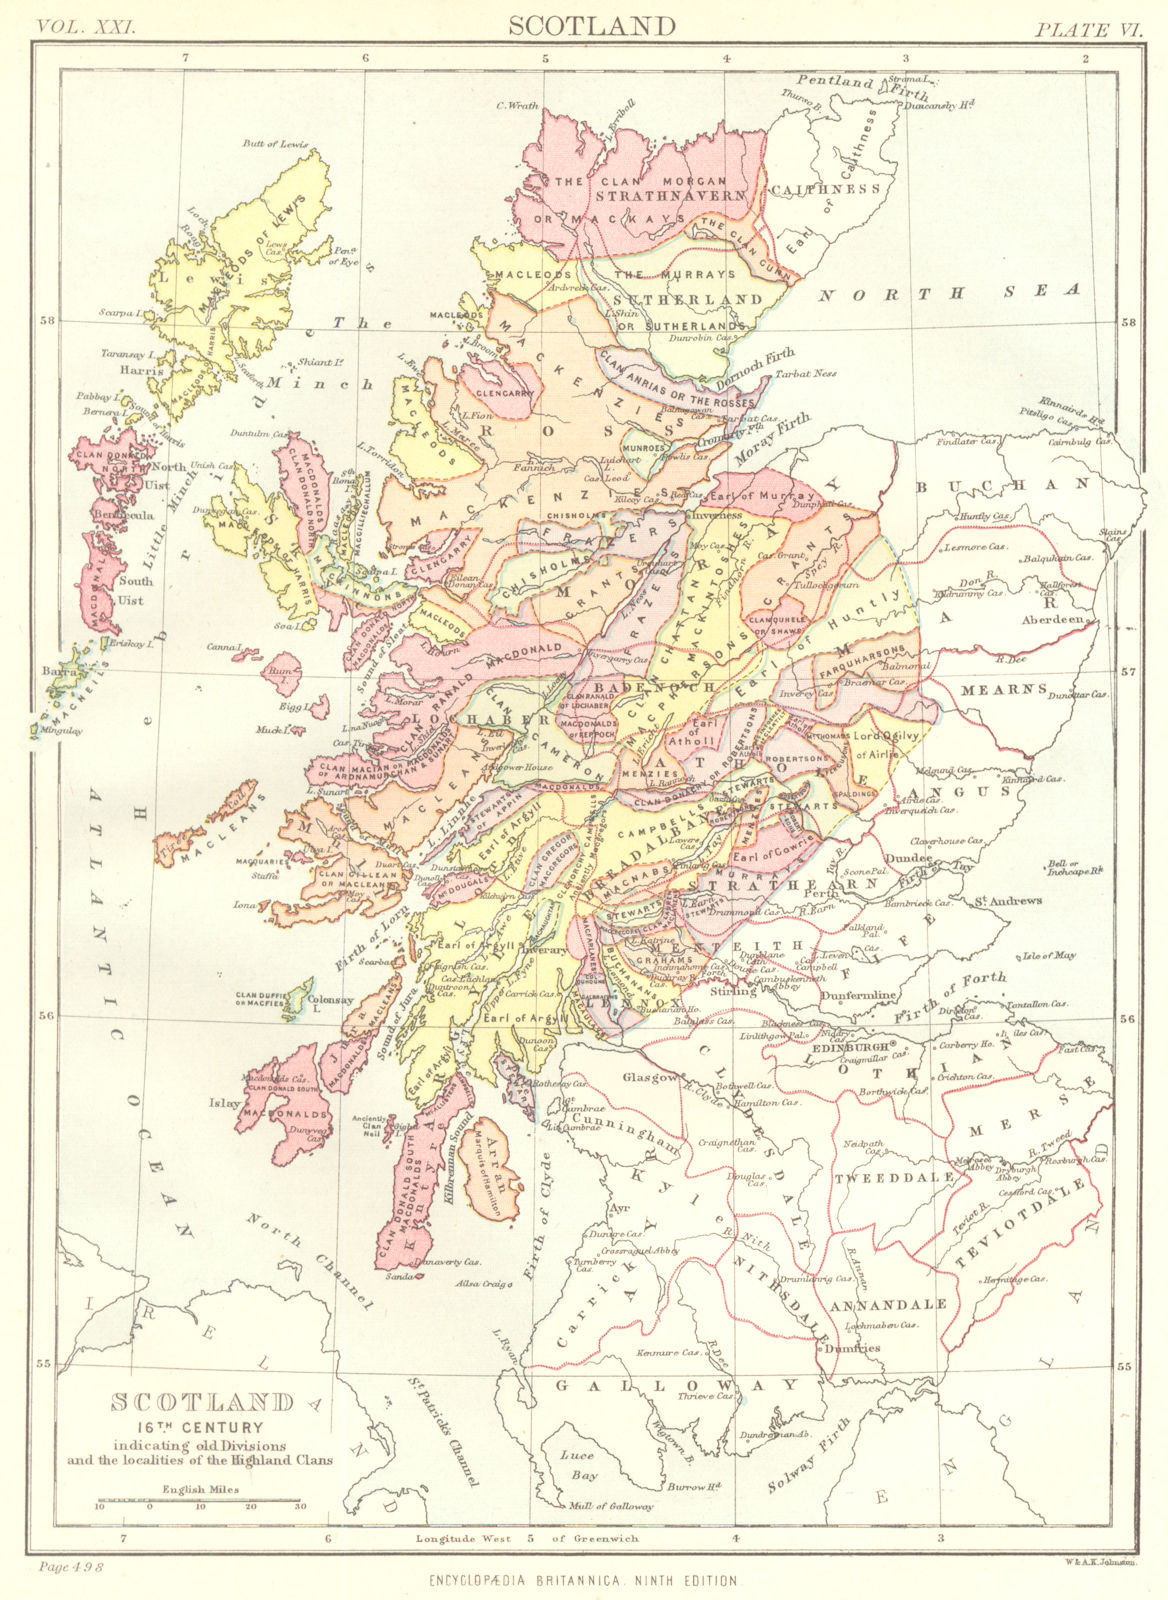 16TH CENTURY SCOTLAND. Showing old divisions localities Highland Clans. 1898 map